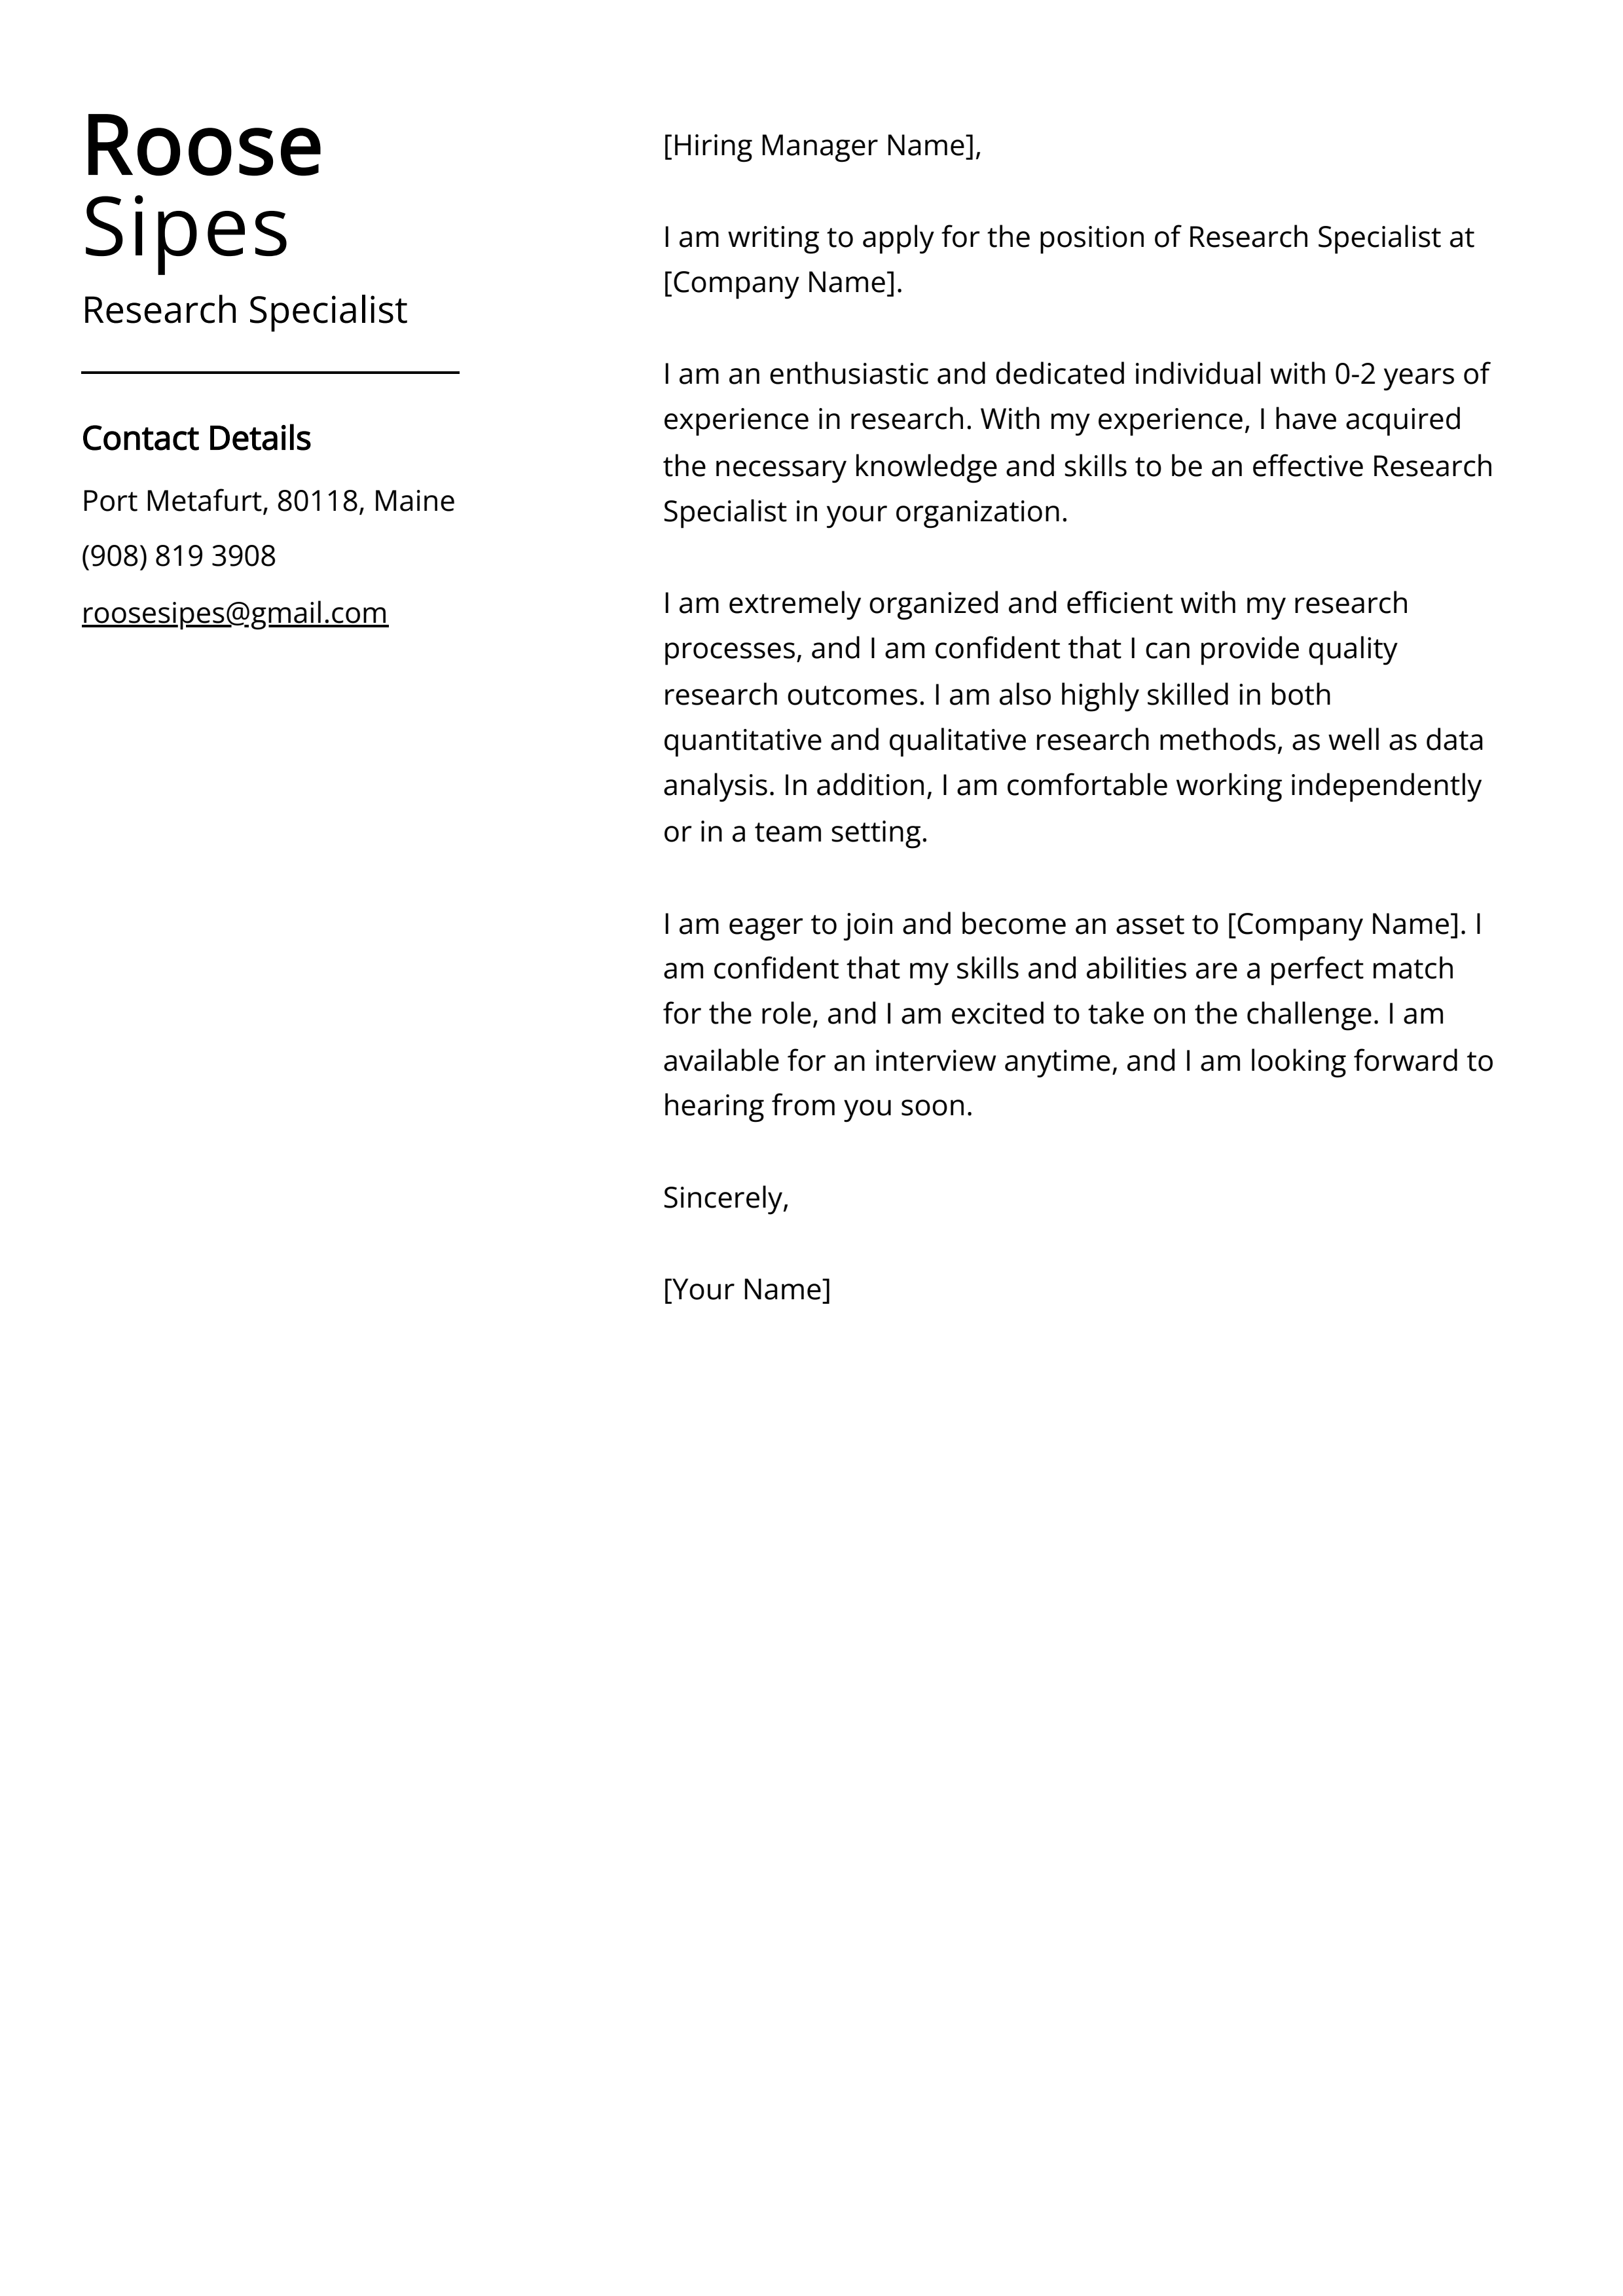 Research Specialist Cover Letter Example